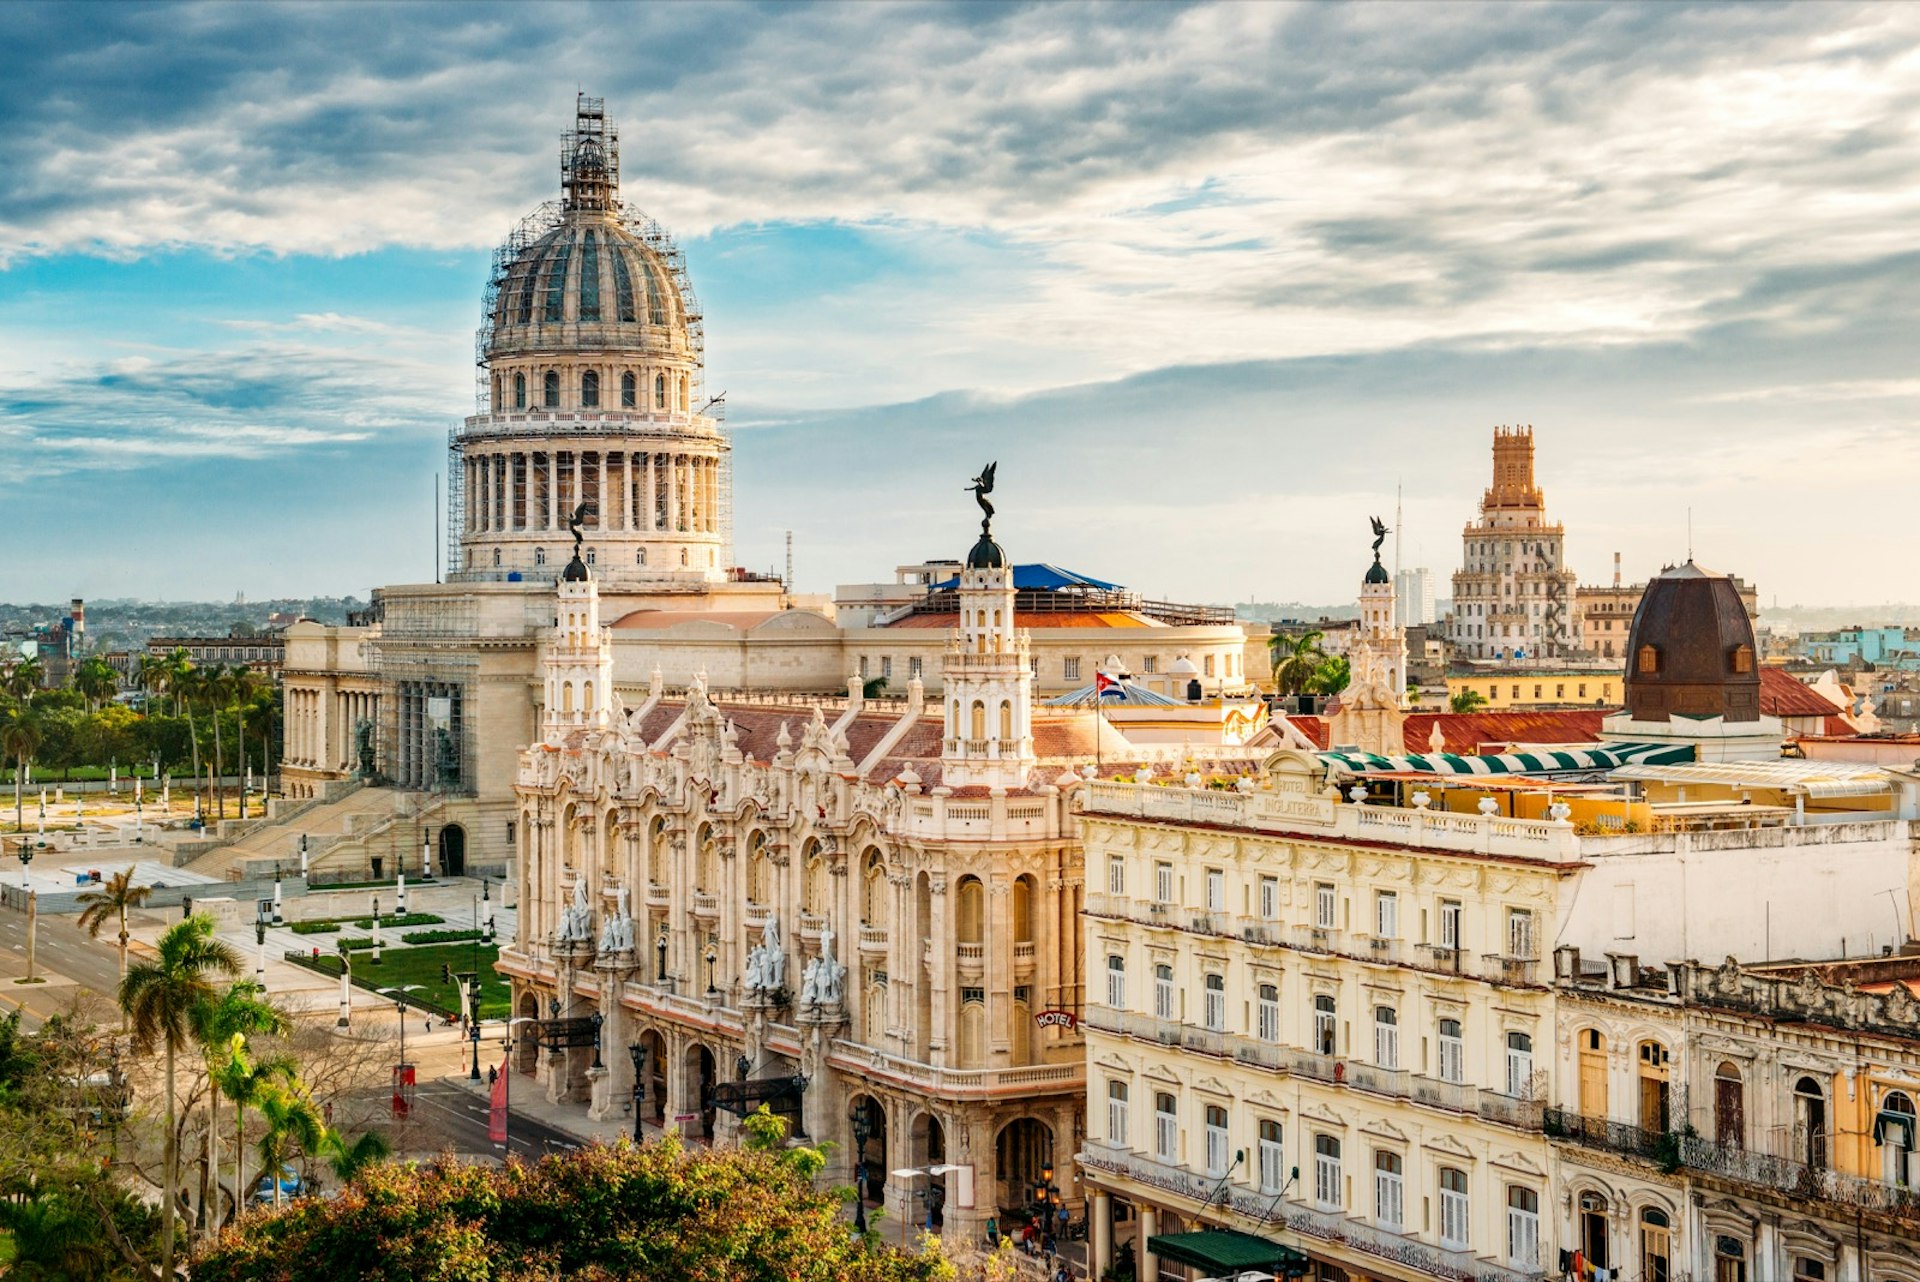 Aerial view of the Old Havana skyline at sunset, Cuba